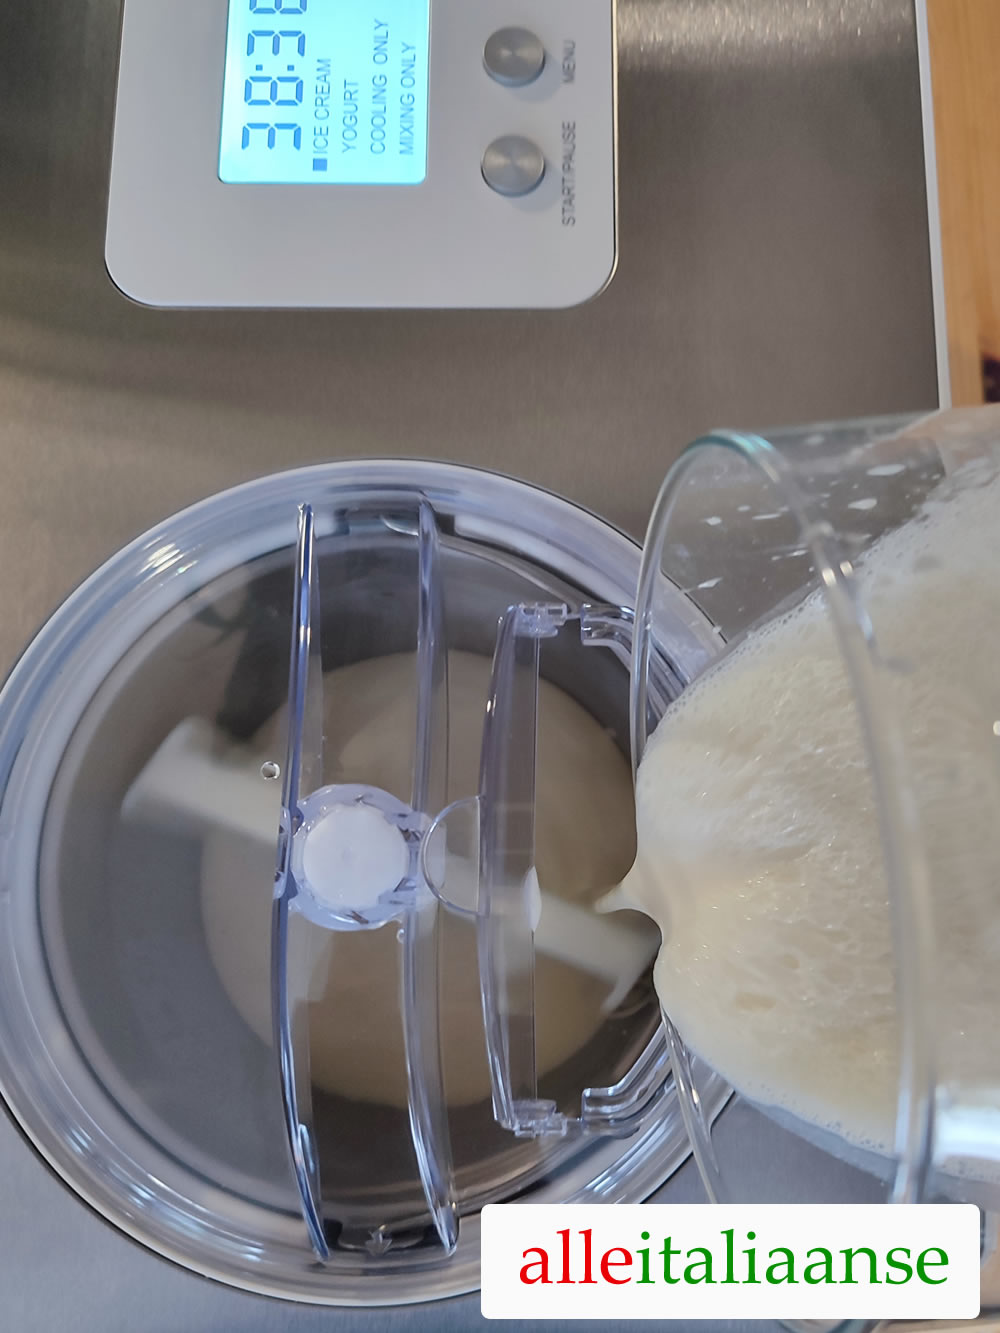 Pour the mixture into the ice cream maker